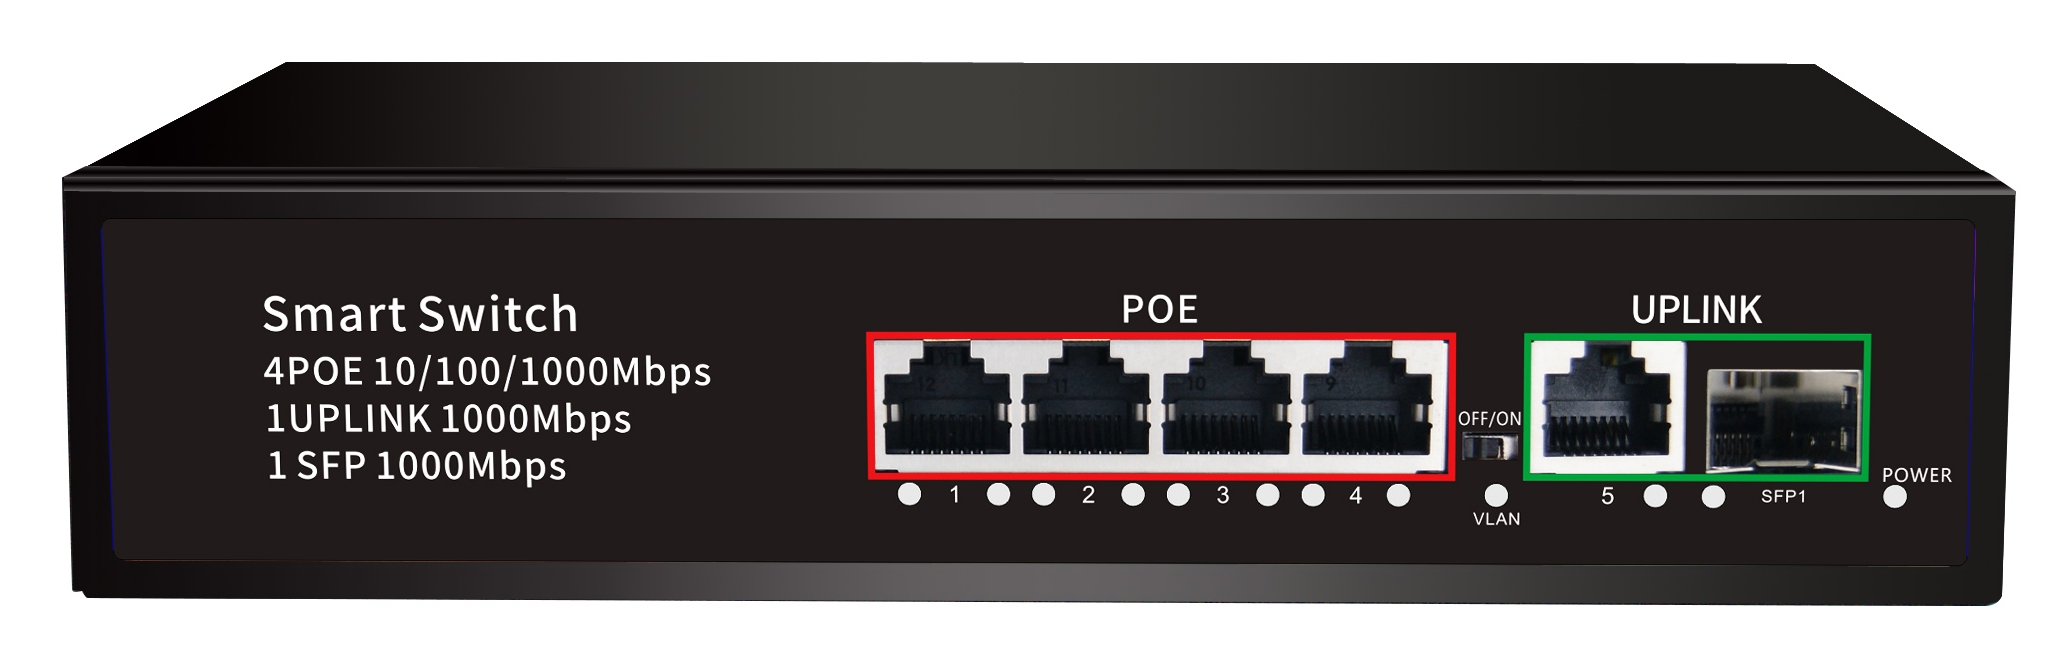 Wholesale China Un-Management Poe Switch Quotes Manufacturer -
 4*100/1000mbps POE port+1*100/1000mbps UP Link port+1*100/1000mbps SFP Port,with VLAN JHA-P41114BMH – JHA